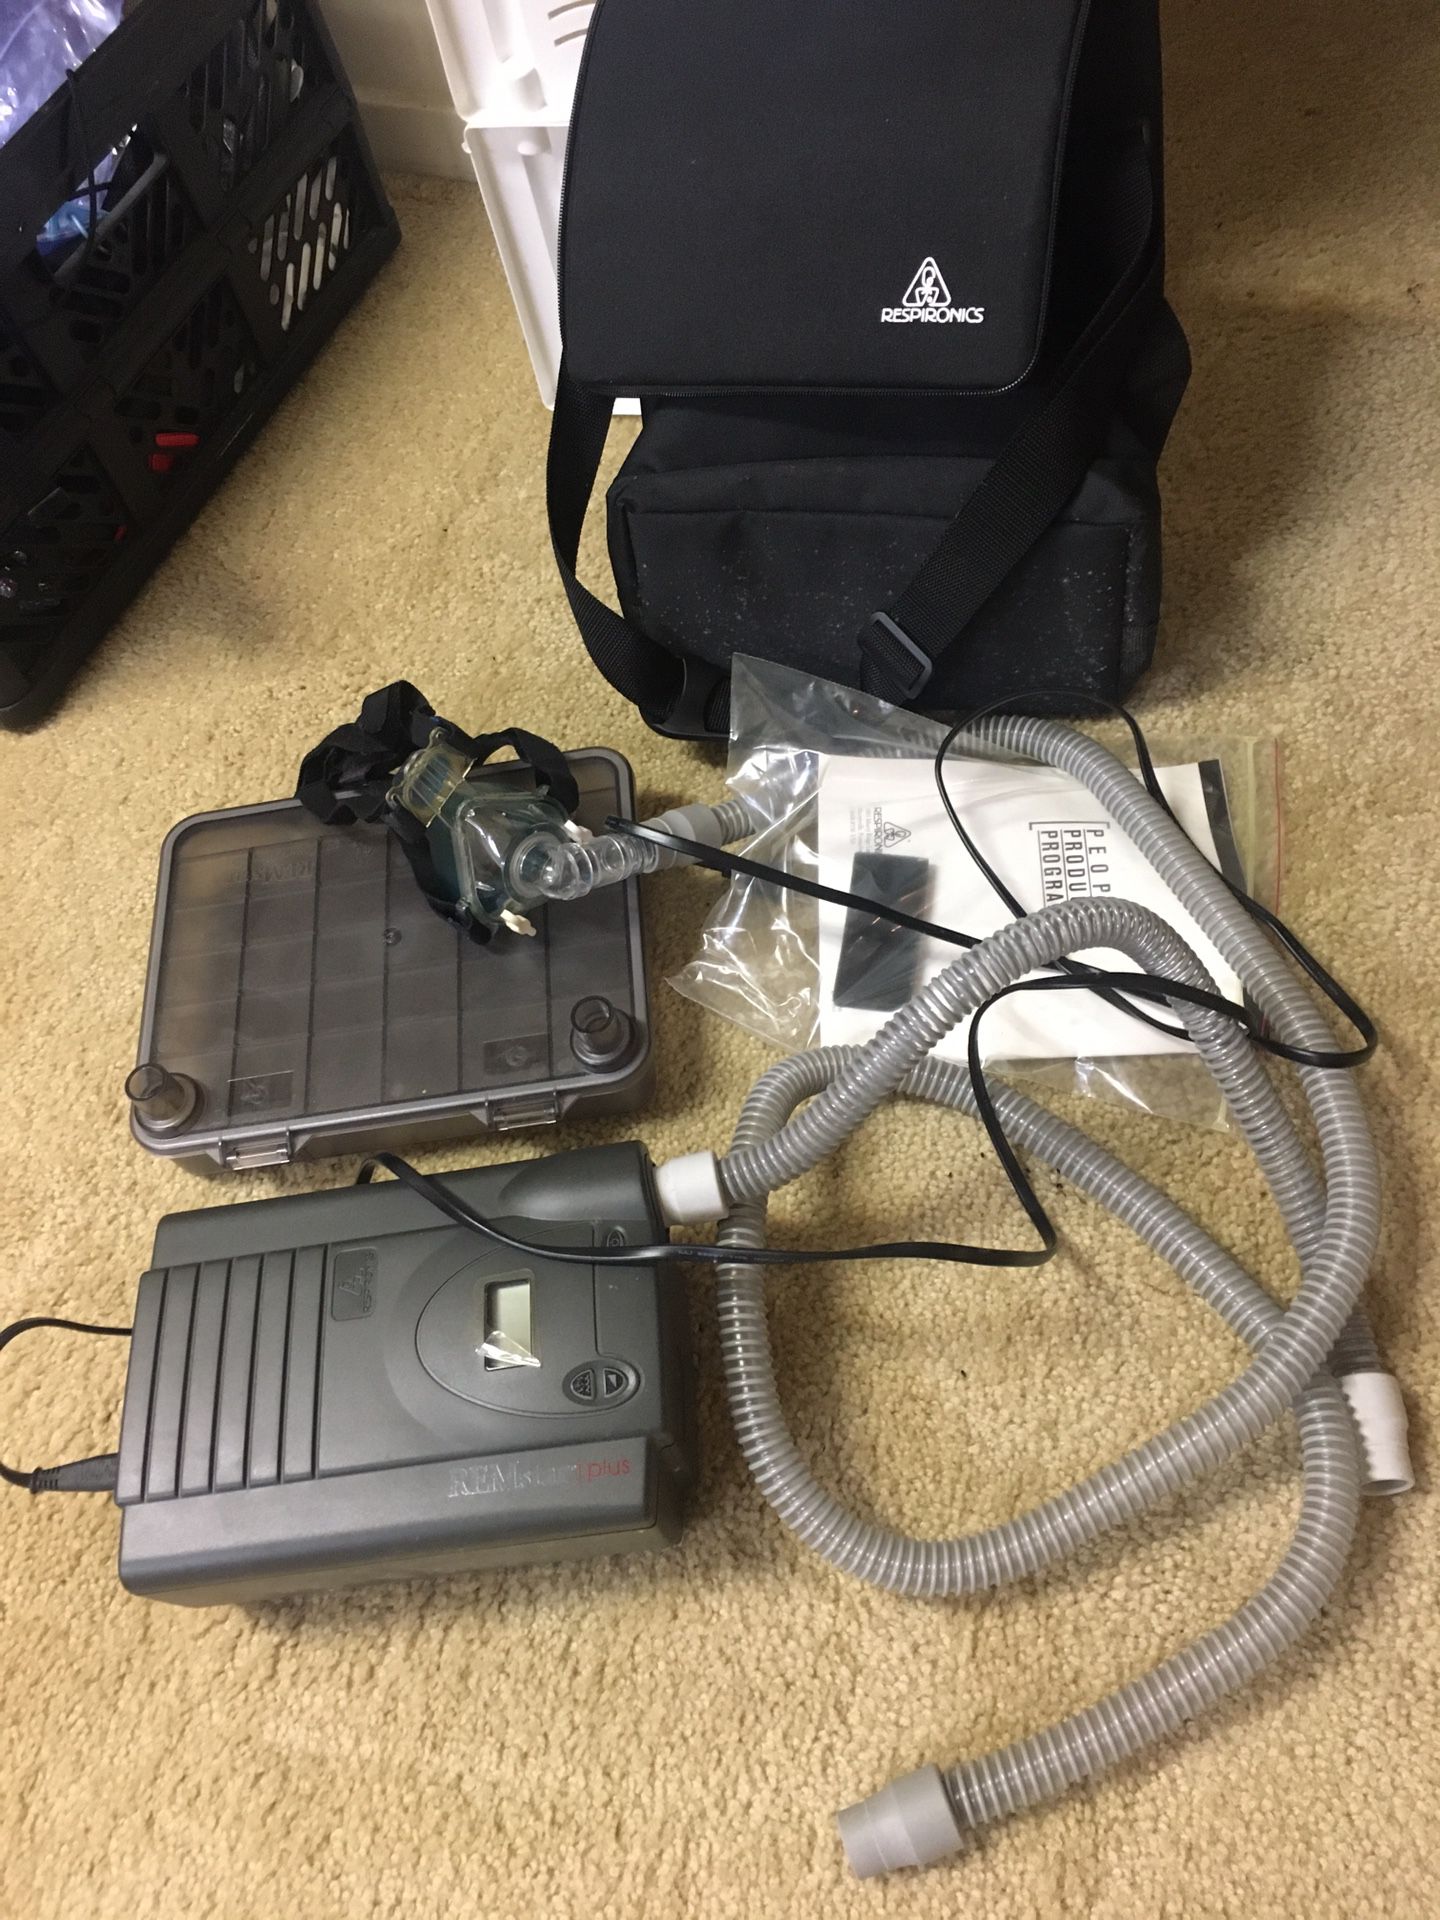 Respironics CPAP System incl all parts, case etc